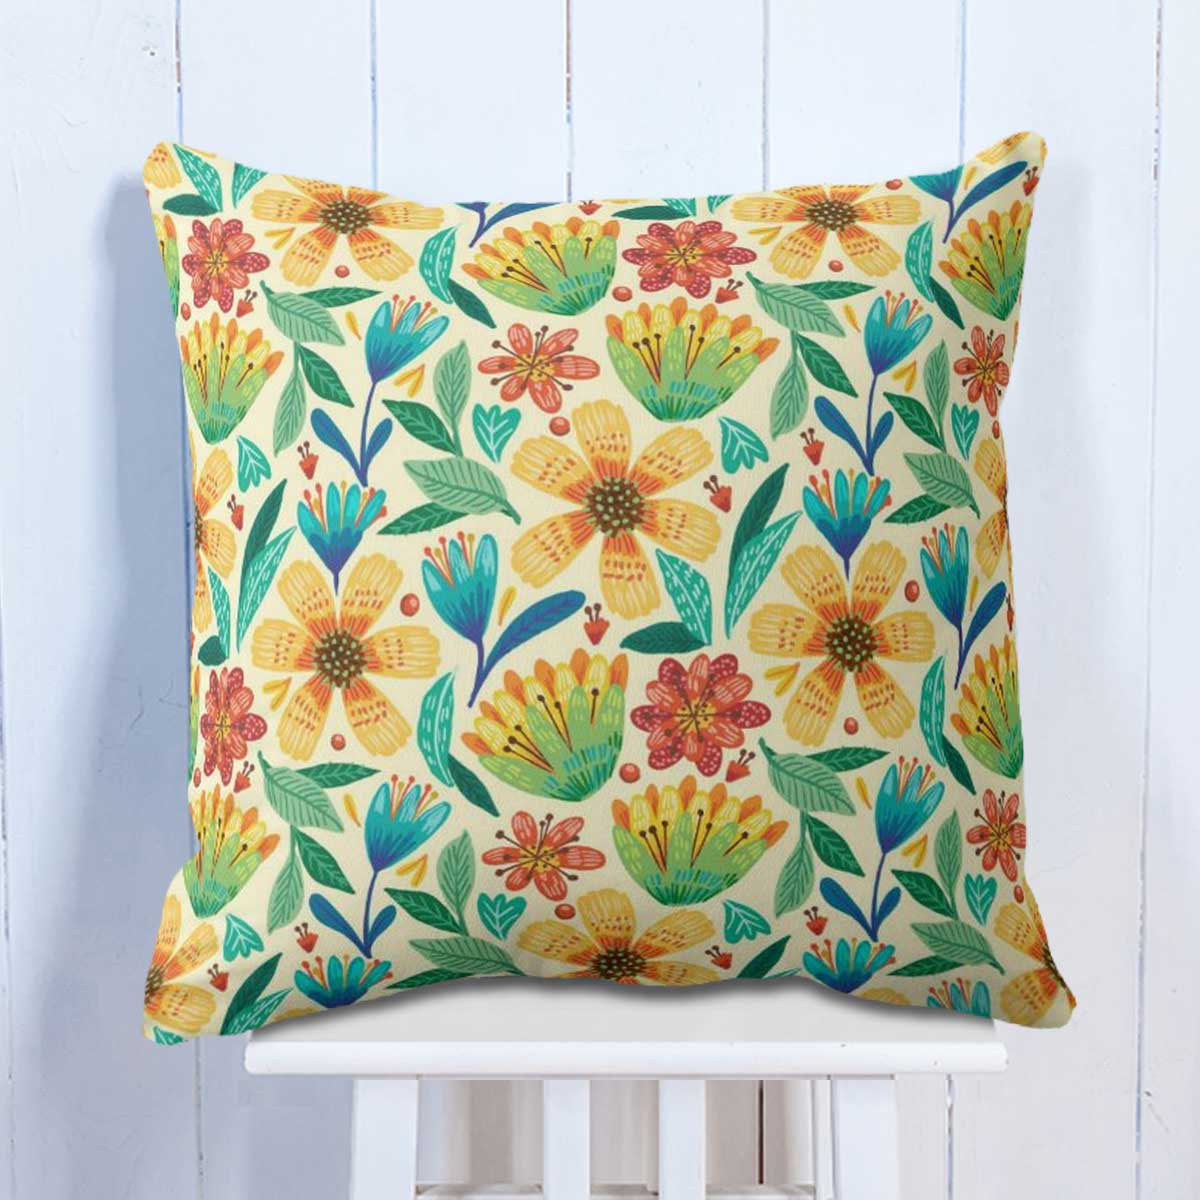 Floral Cushion (Set of 3)